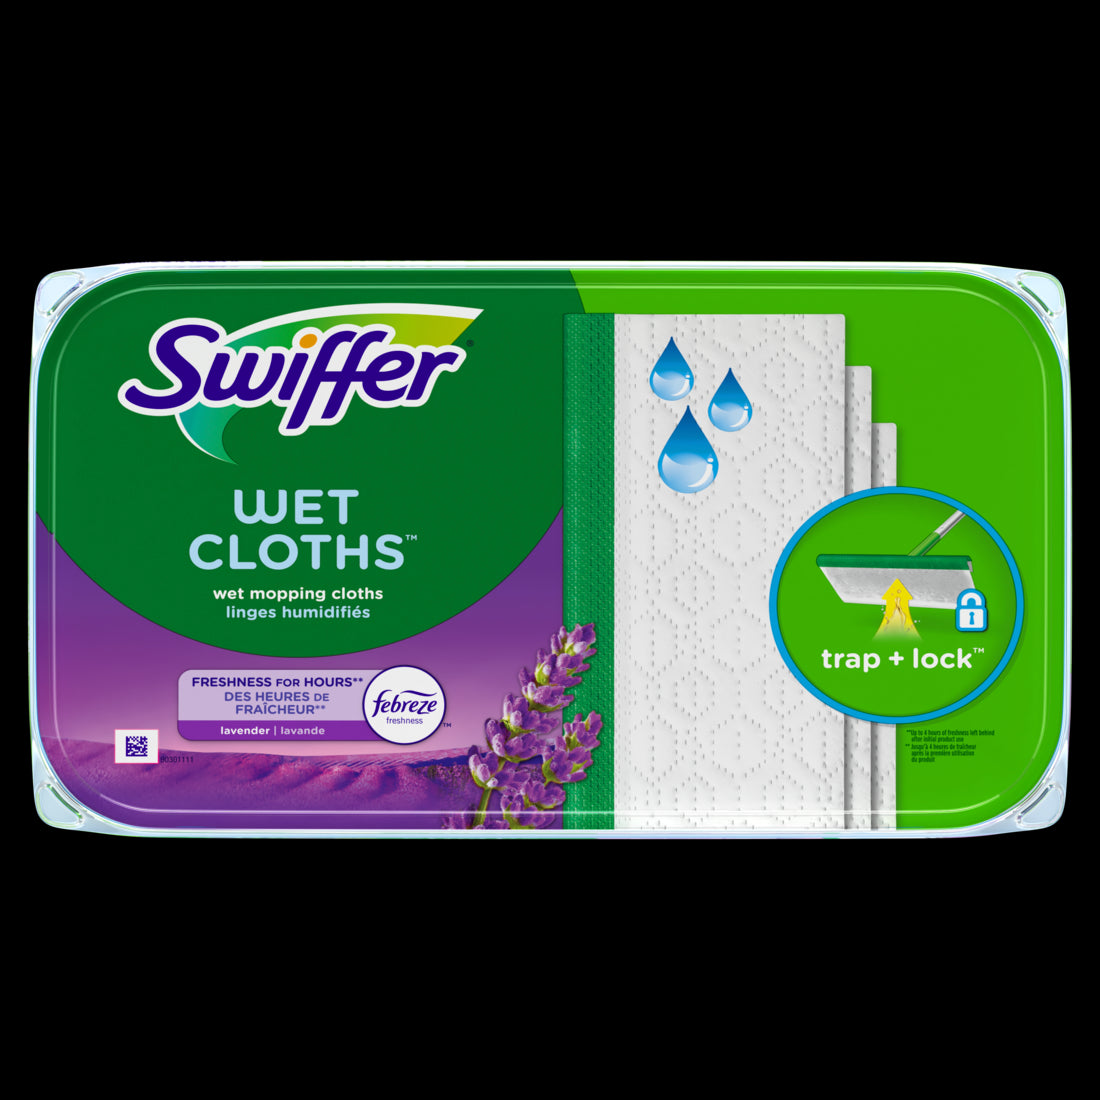 Swiffer Sweeper Wet Mopping Cloths with Febreze, Lavender Vanilla & Comfort- 12ct/12pk